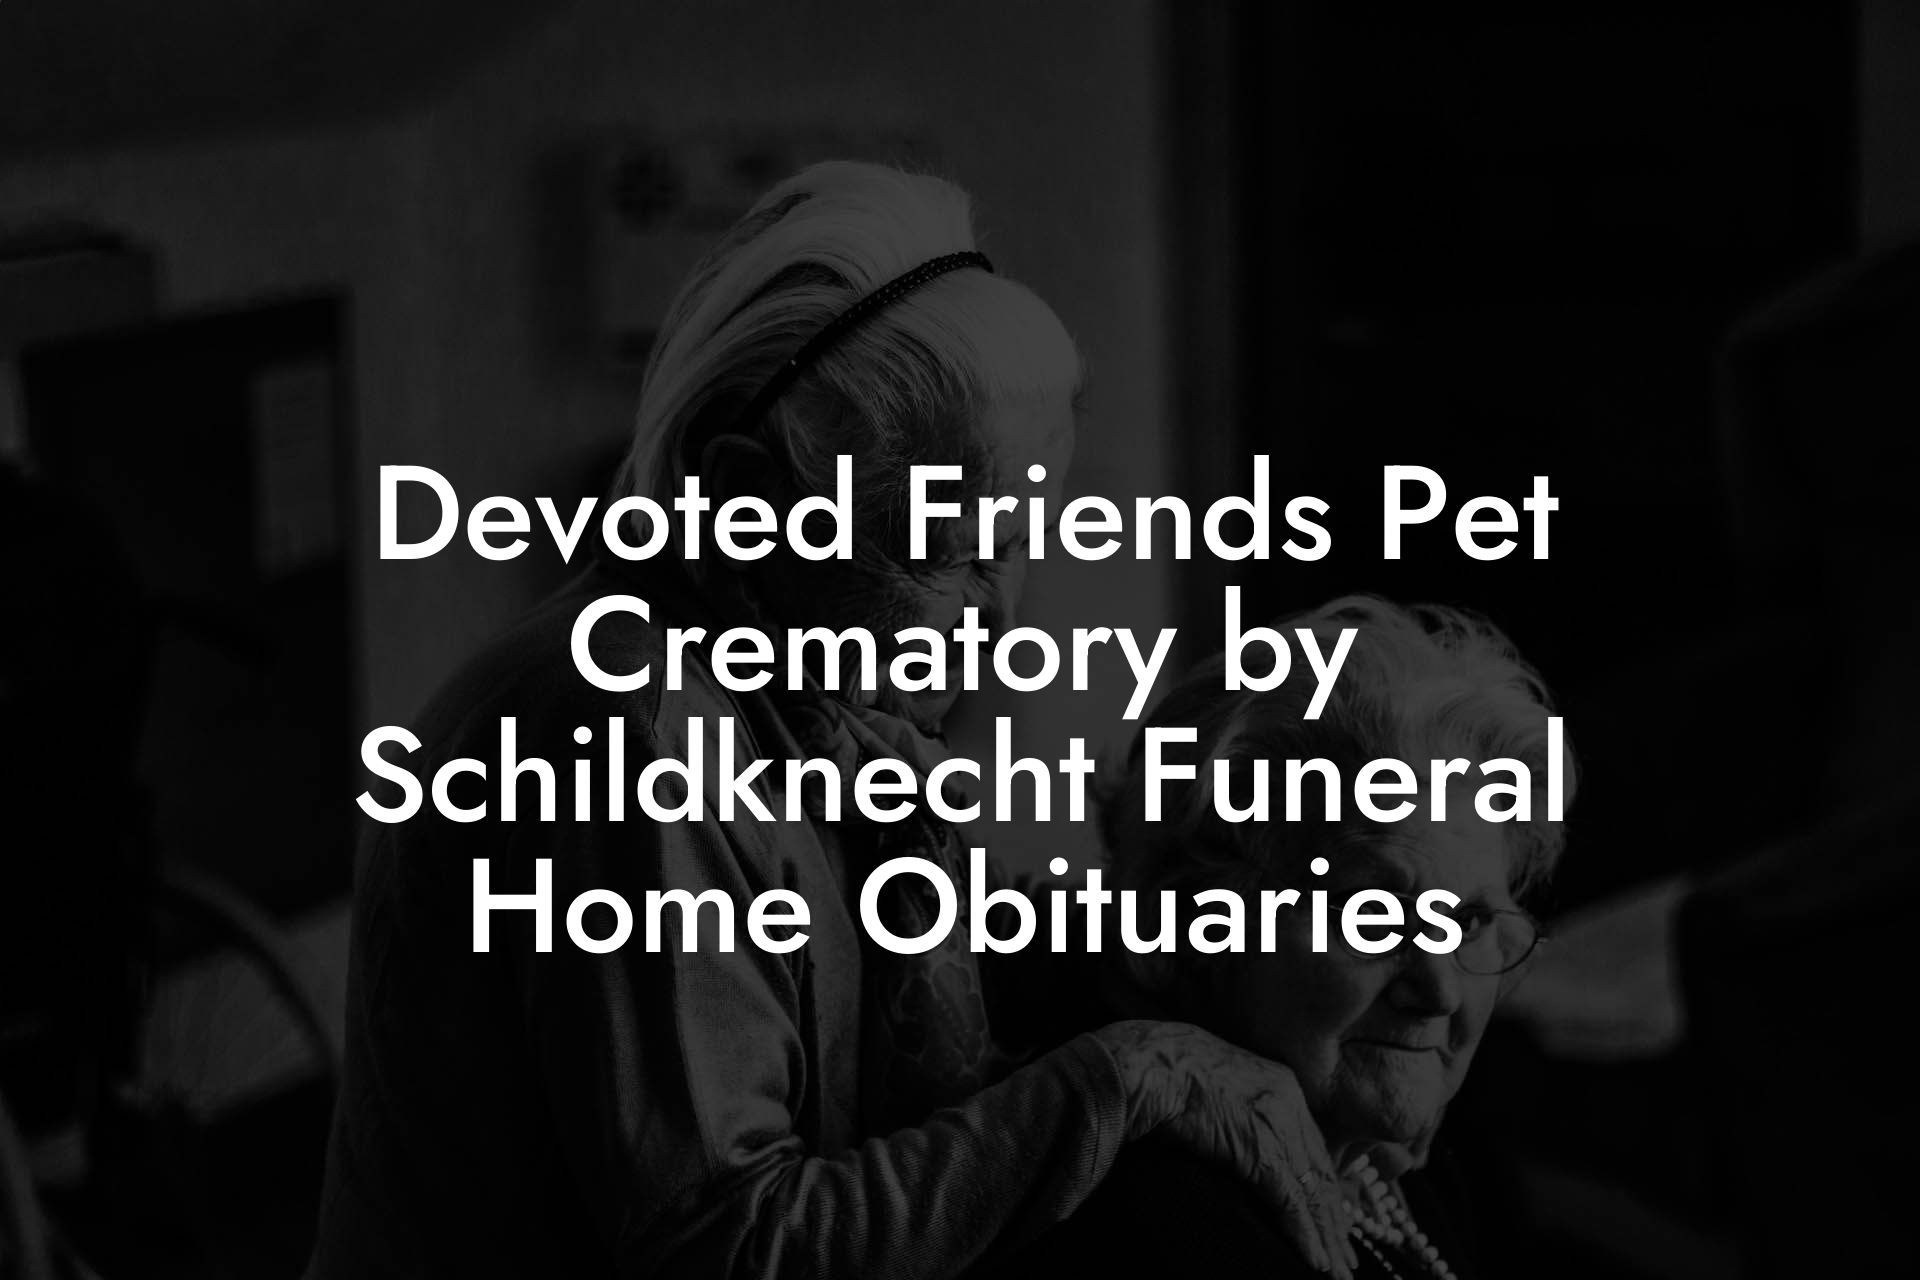 Devoted Friends Pet Crematory by Schildknecht Funeral Home Obituaries